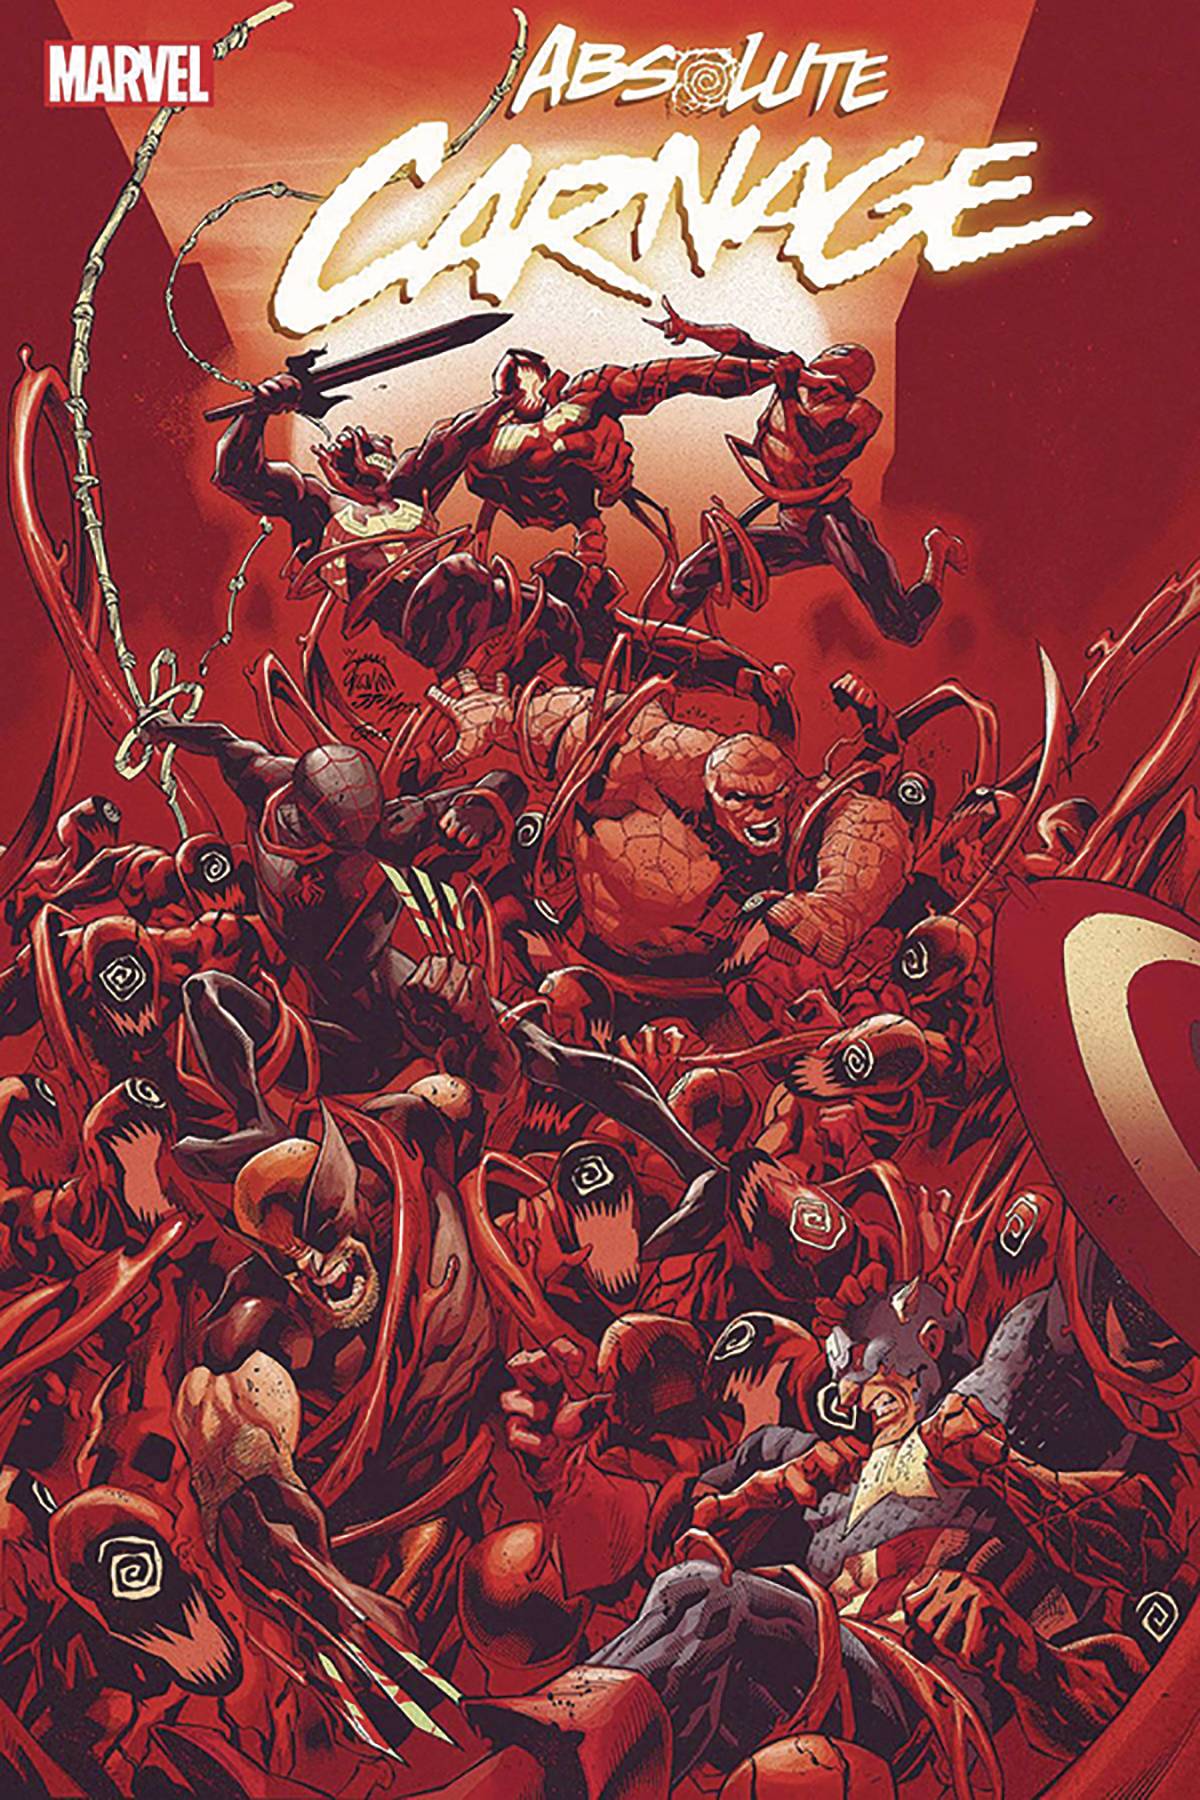 DF ABSOLUTE CARNAGE #5 SGN CATES